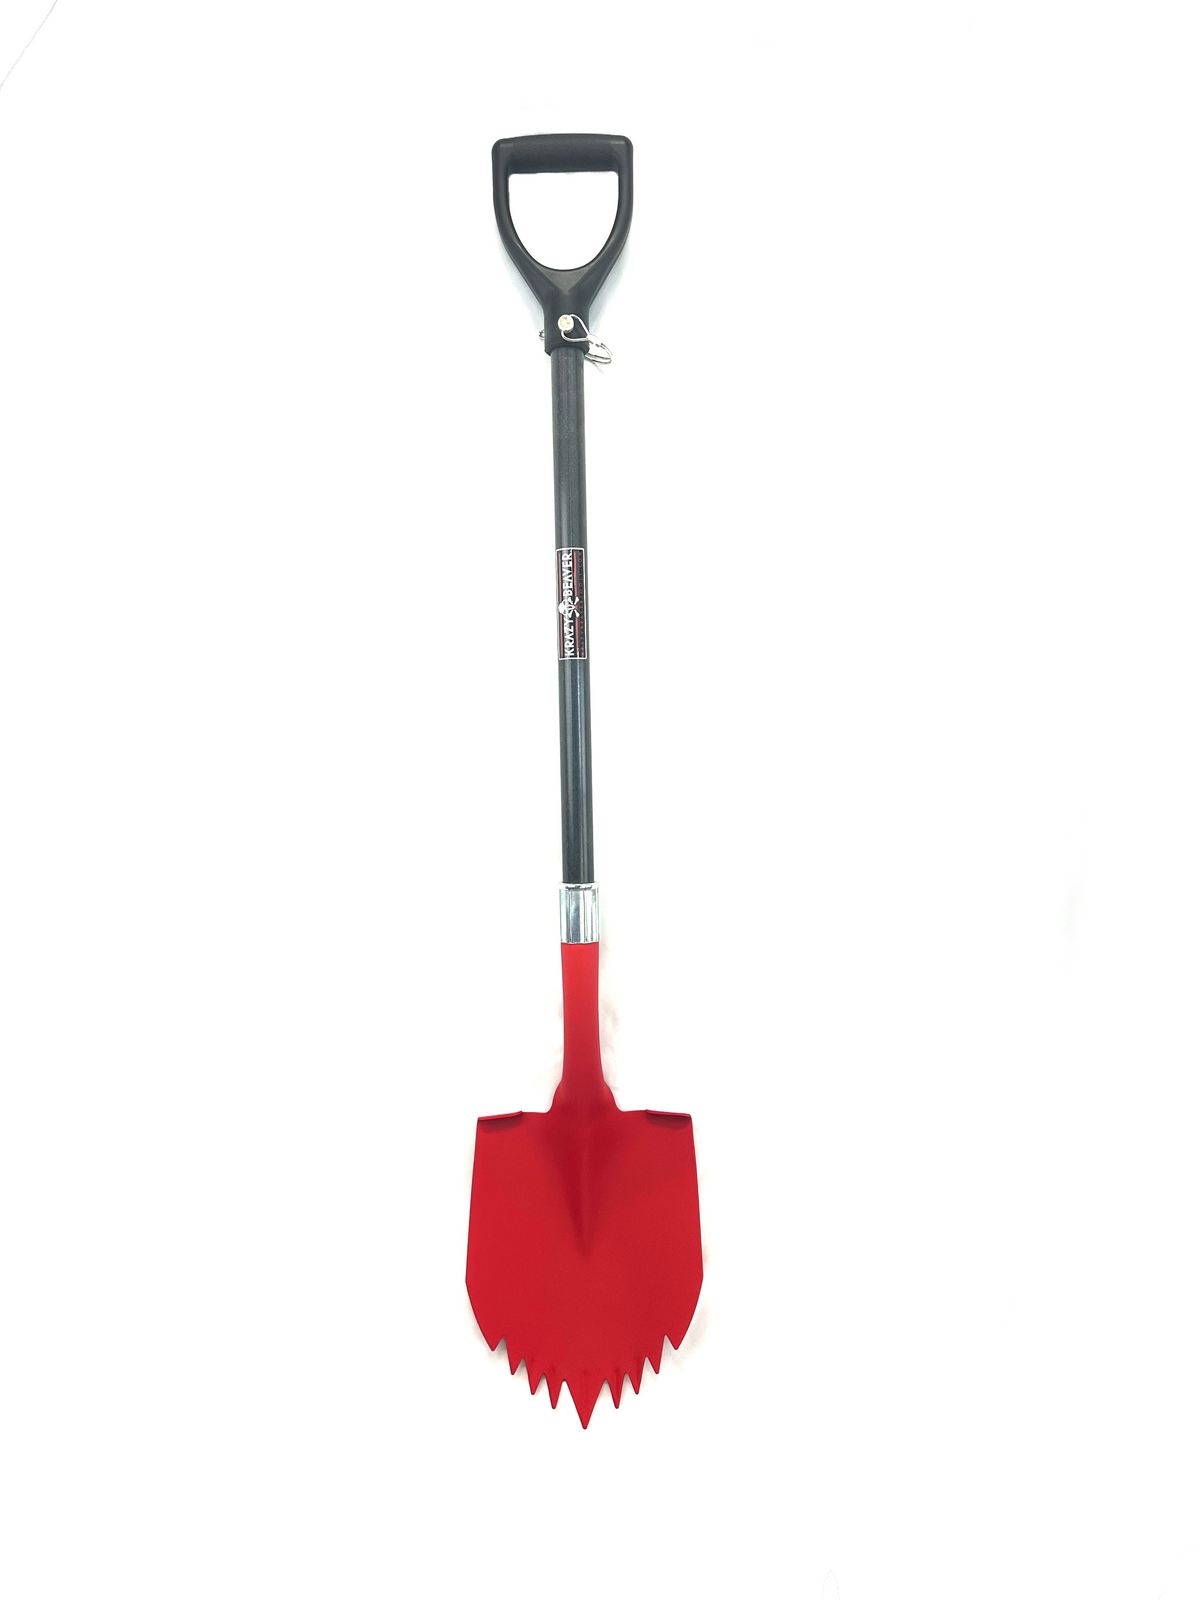 Krazy Beaver Shovel XL (Red Textured Head / Black Handle)  Recovery Gear, Camping gear, Shovel, Camping Krazy Beaver Tools- Overland Kitted